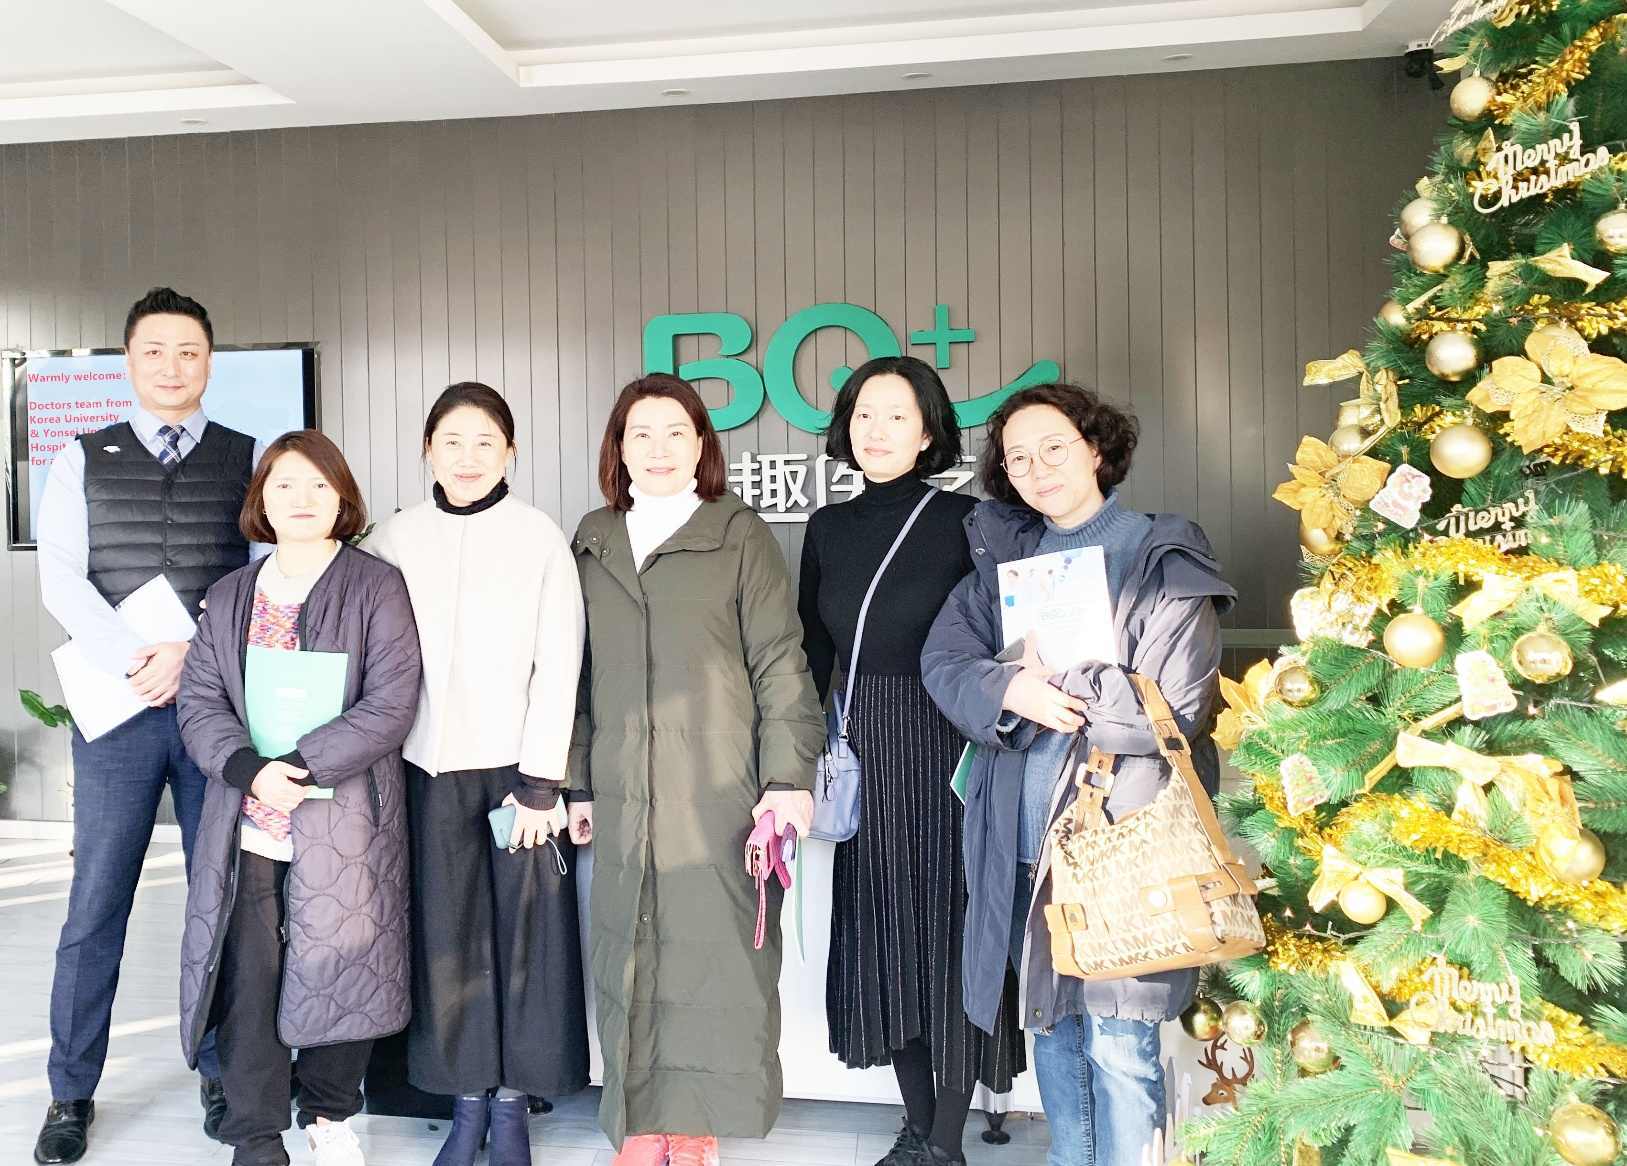 Doctors from famous universities in South Korea came to visit BQ+